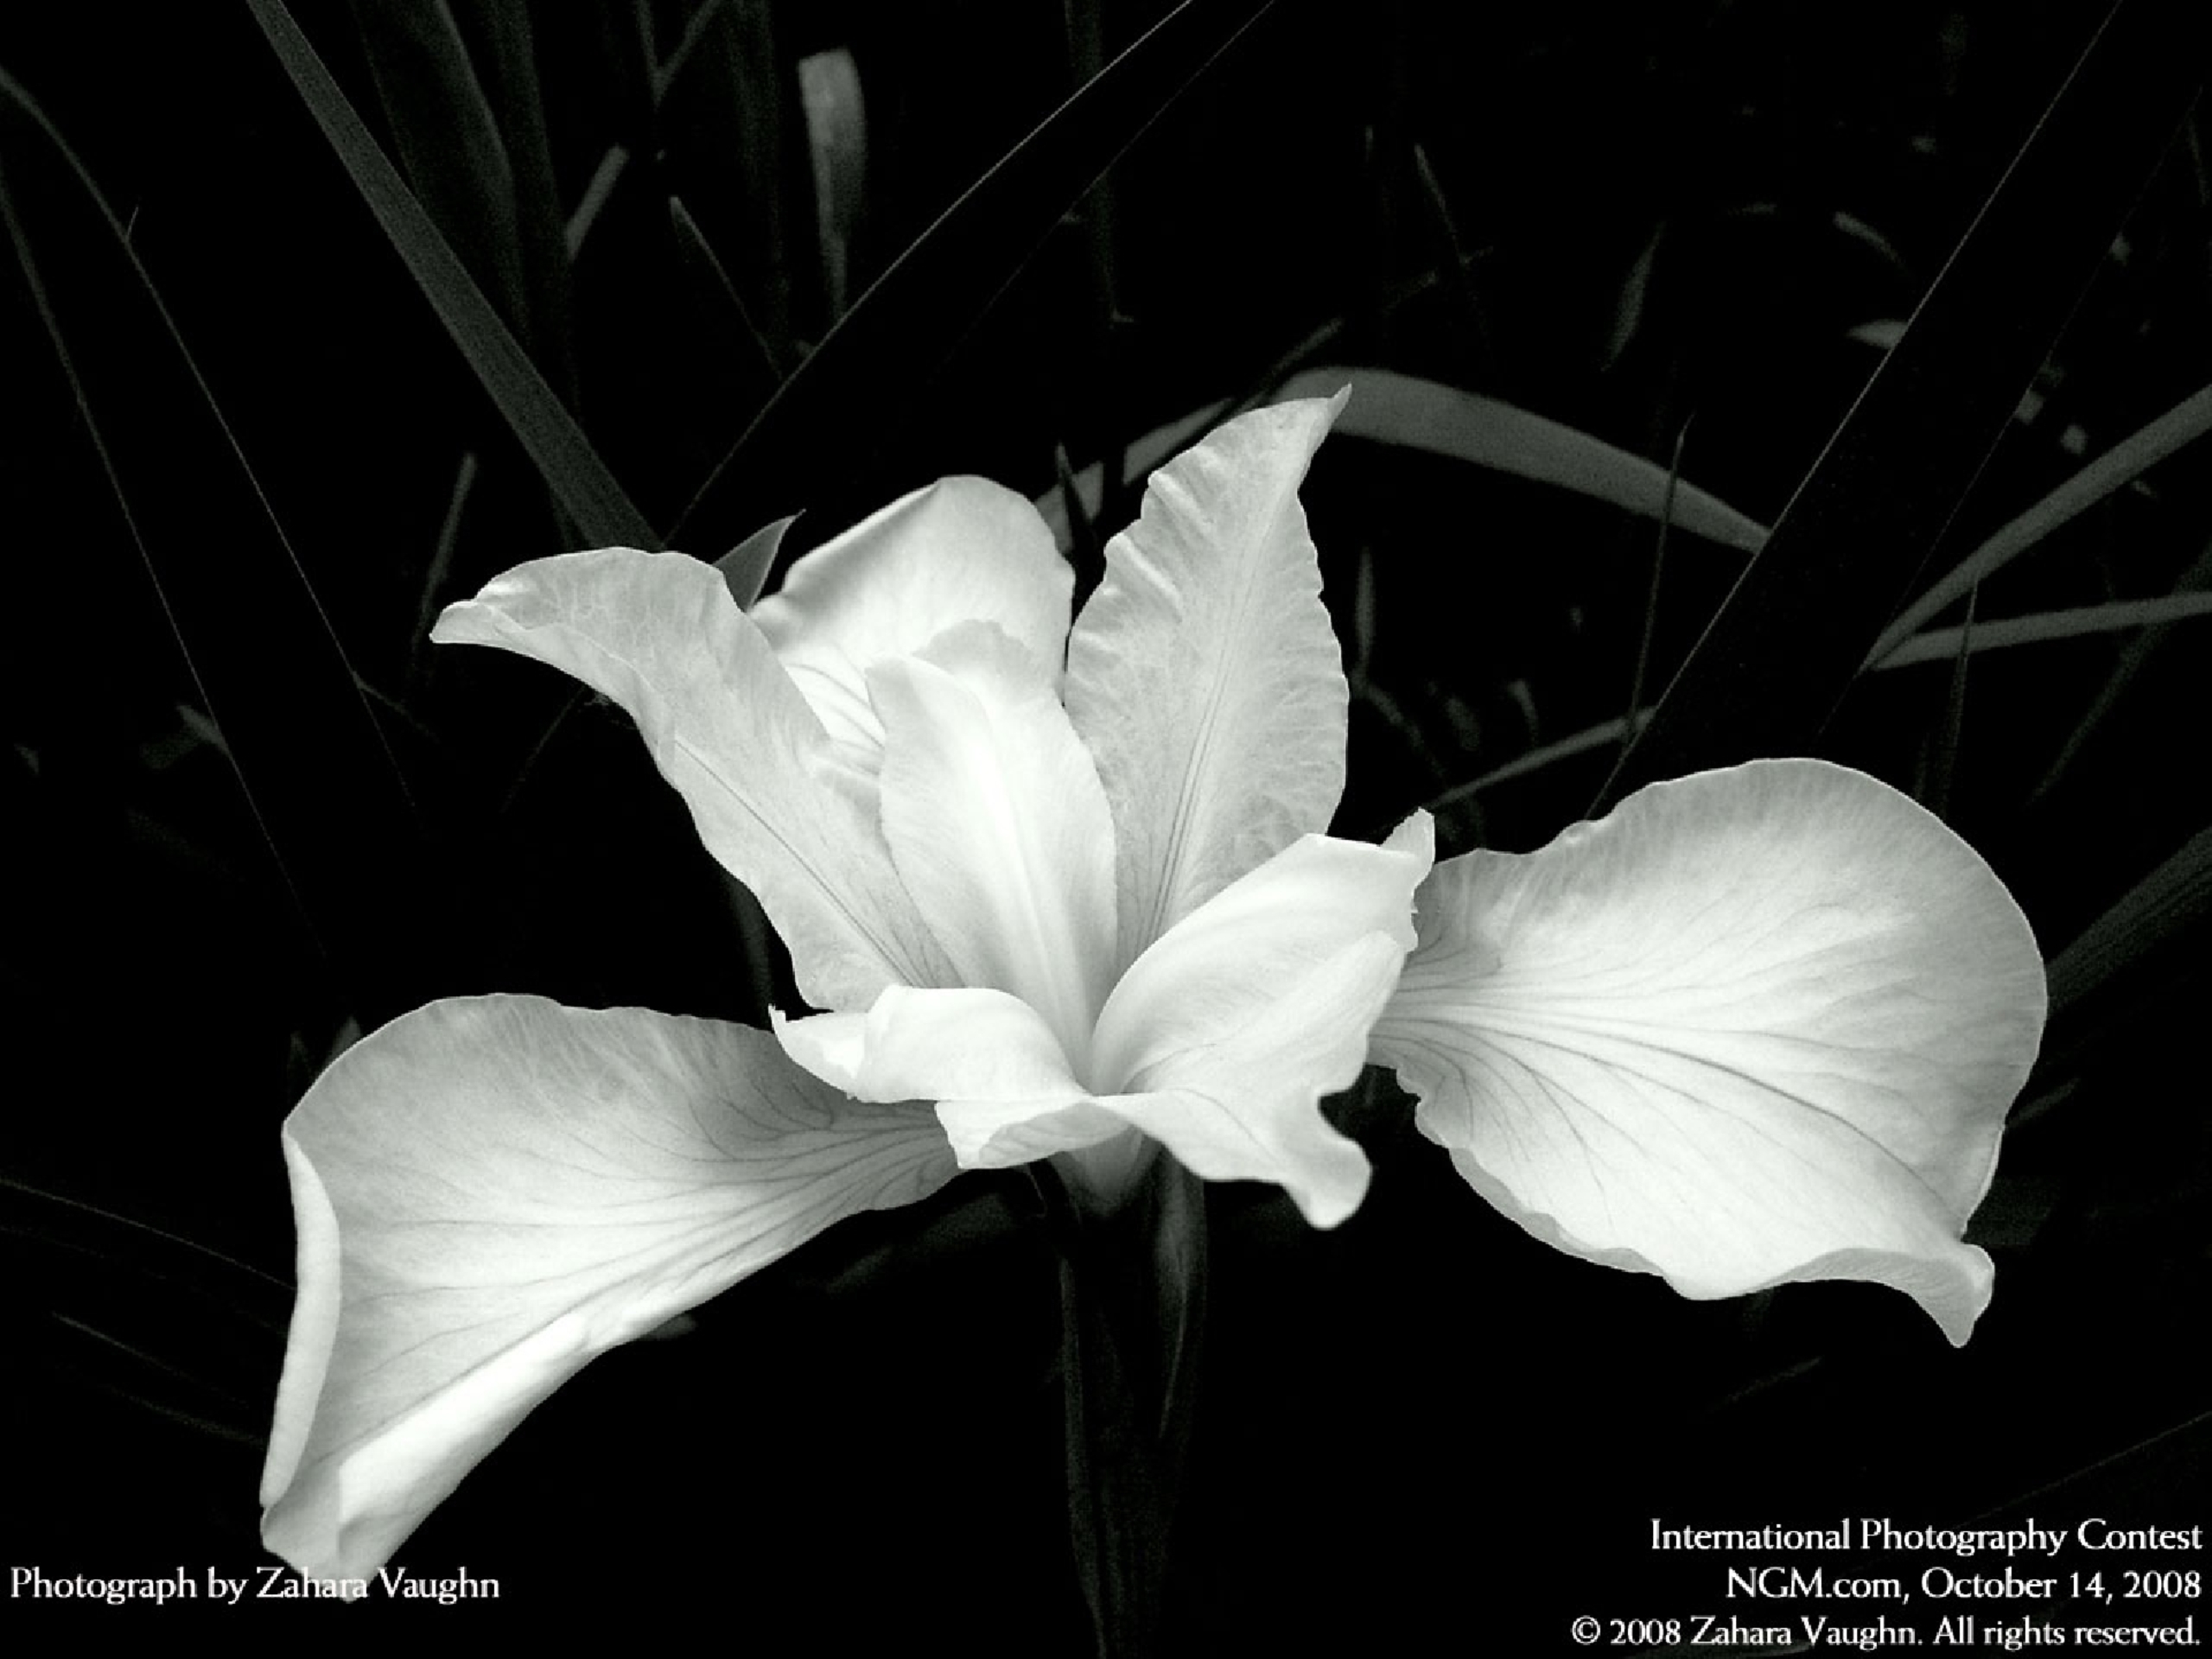 Black And White Flowers Image Thecelebritypix